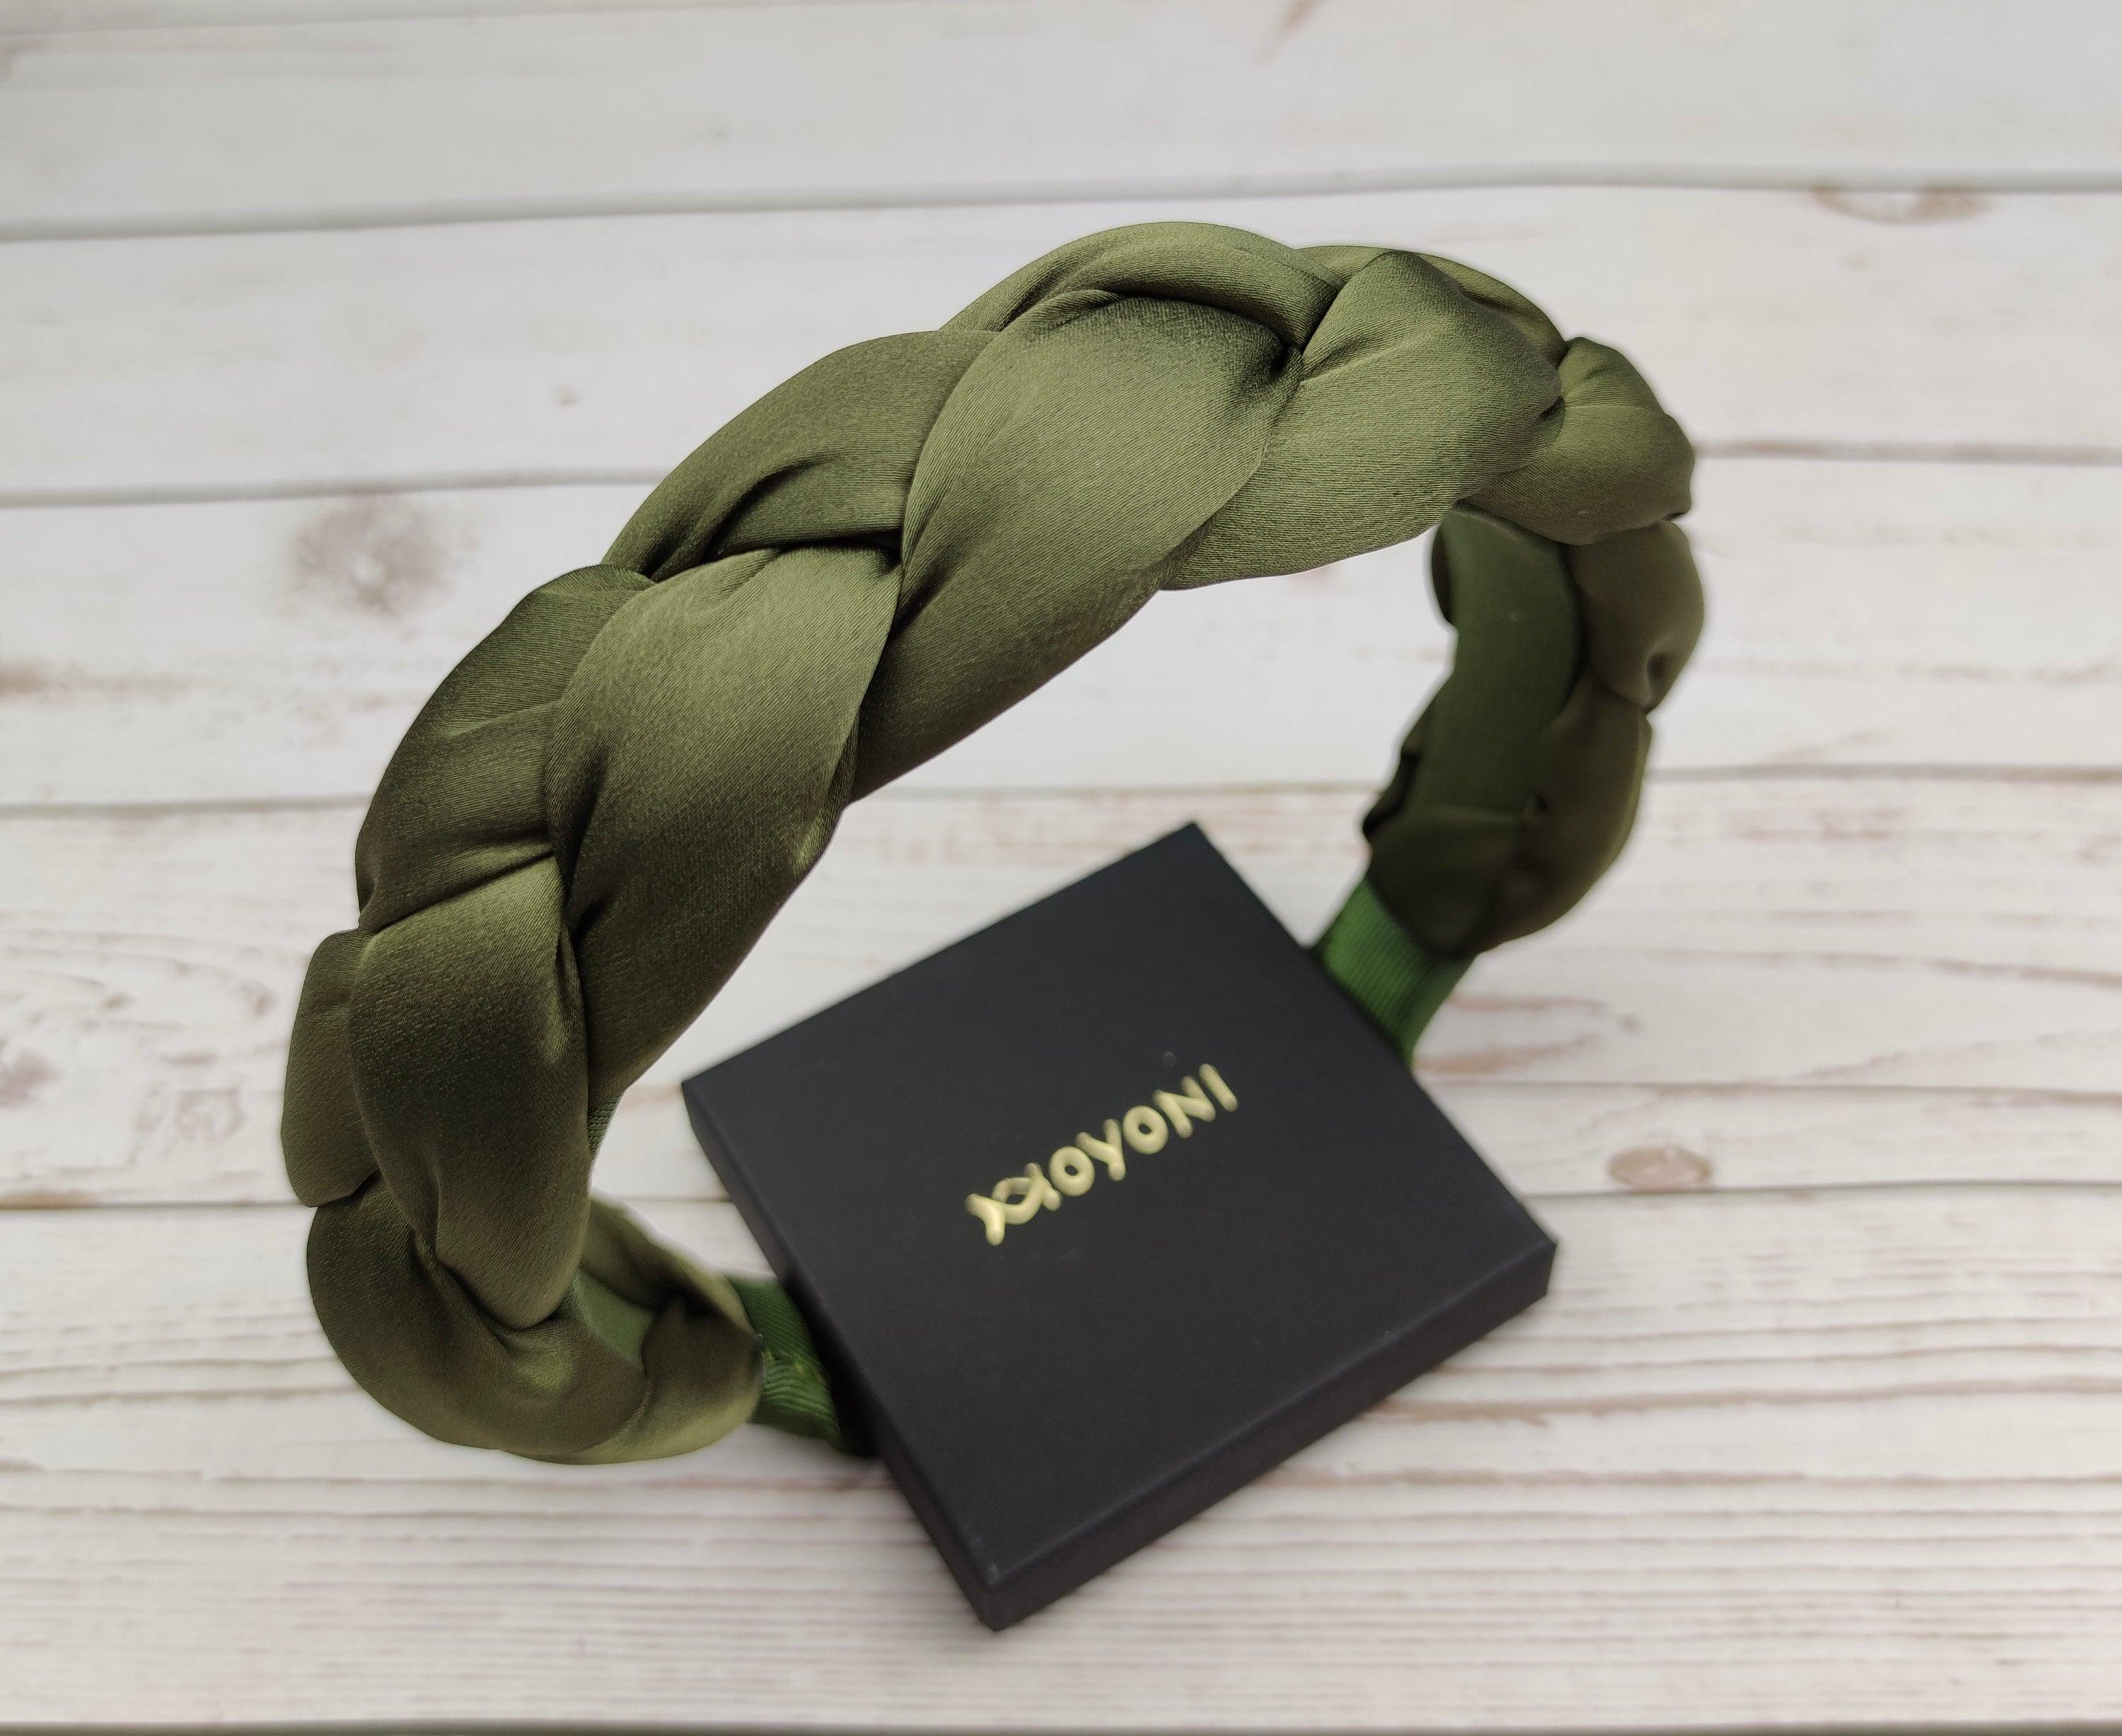 Premium Stylish Army Green Padded Satin Headband - Twisted Women's Fashion Accessory - Braided Girl's Hairband - Pea Green Knotted Turban available at Moyoni Design